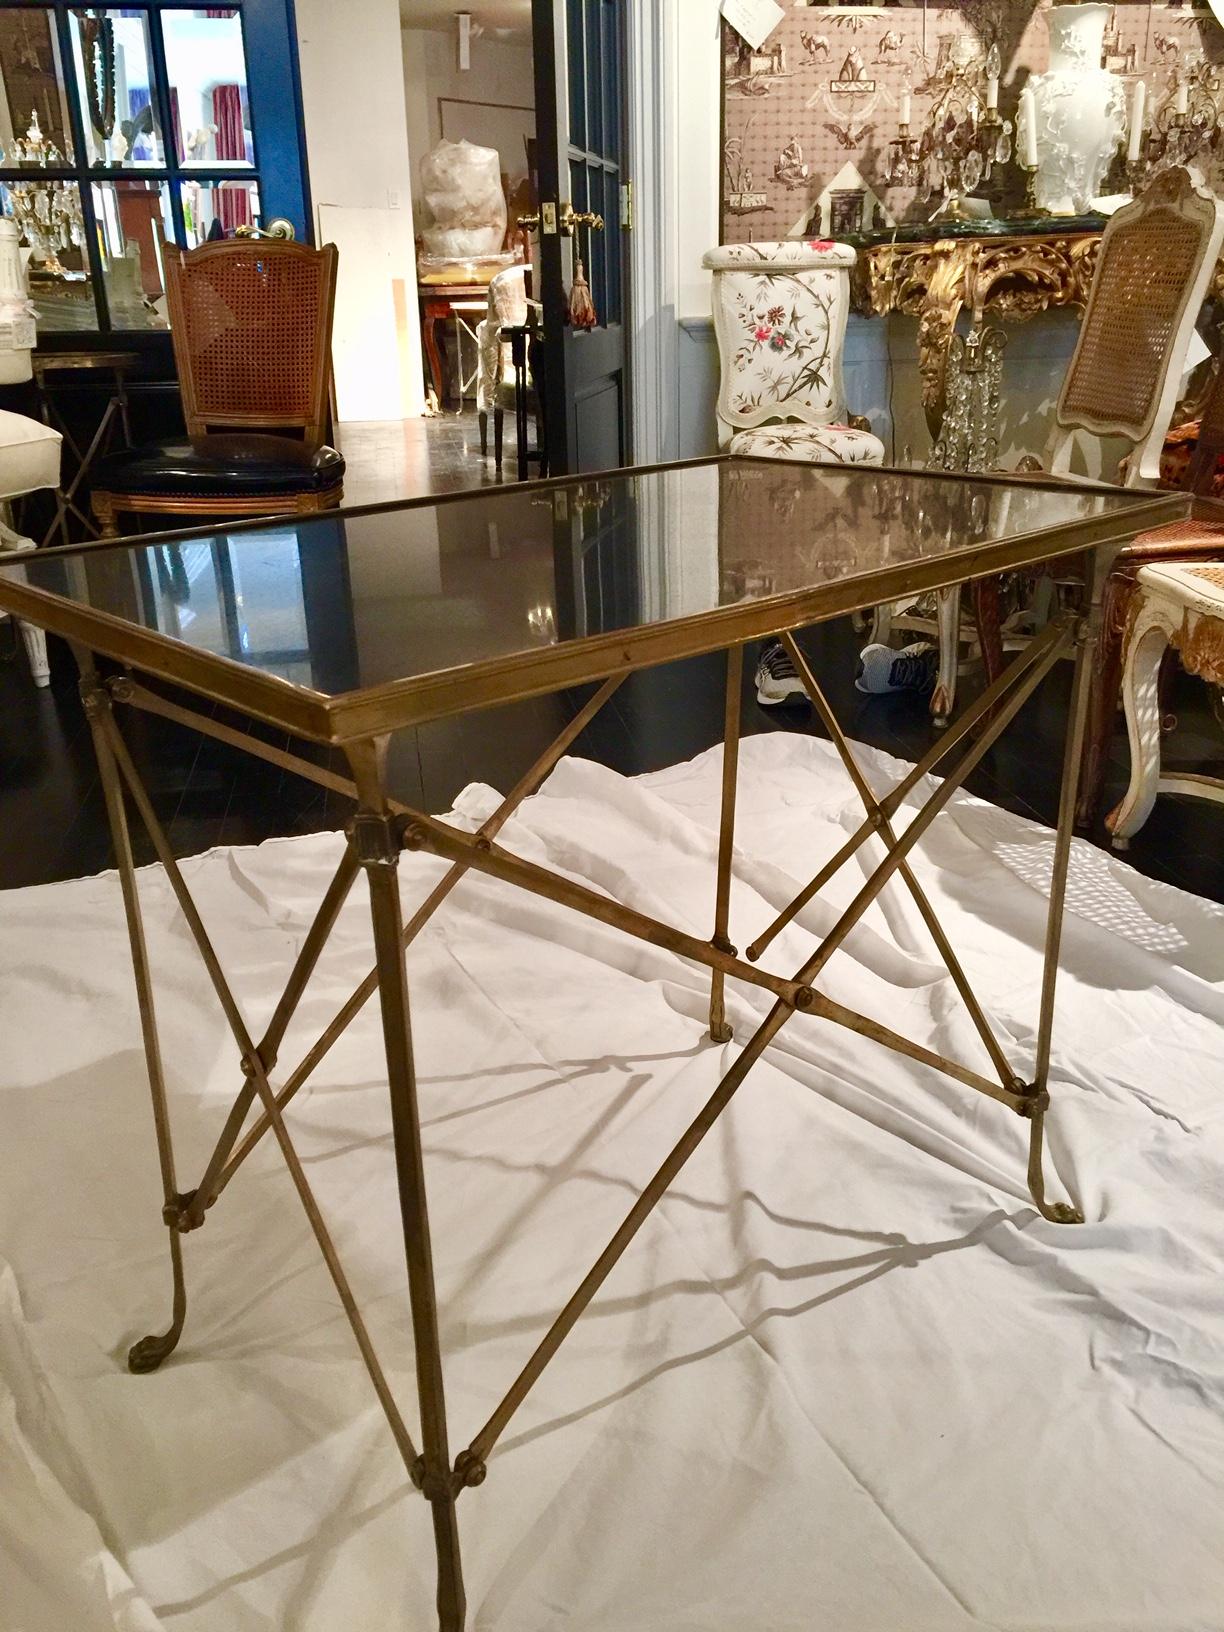 A Classic neoclassical French Empire style bronze and black marble rectangular guéridon table on slender bronze legs with paw feet. The rectangular black marble-top is surrounded by a decorative bronze band. The legs are joined by an openwork